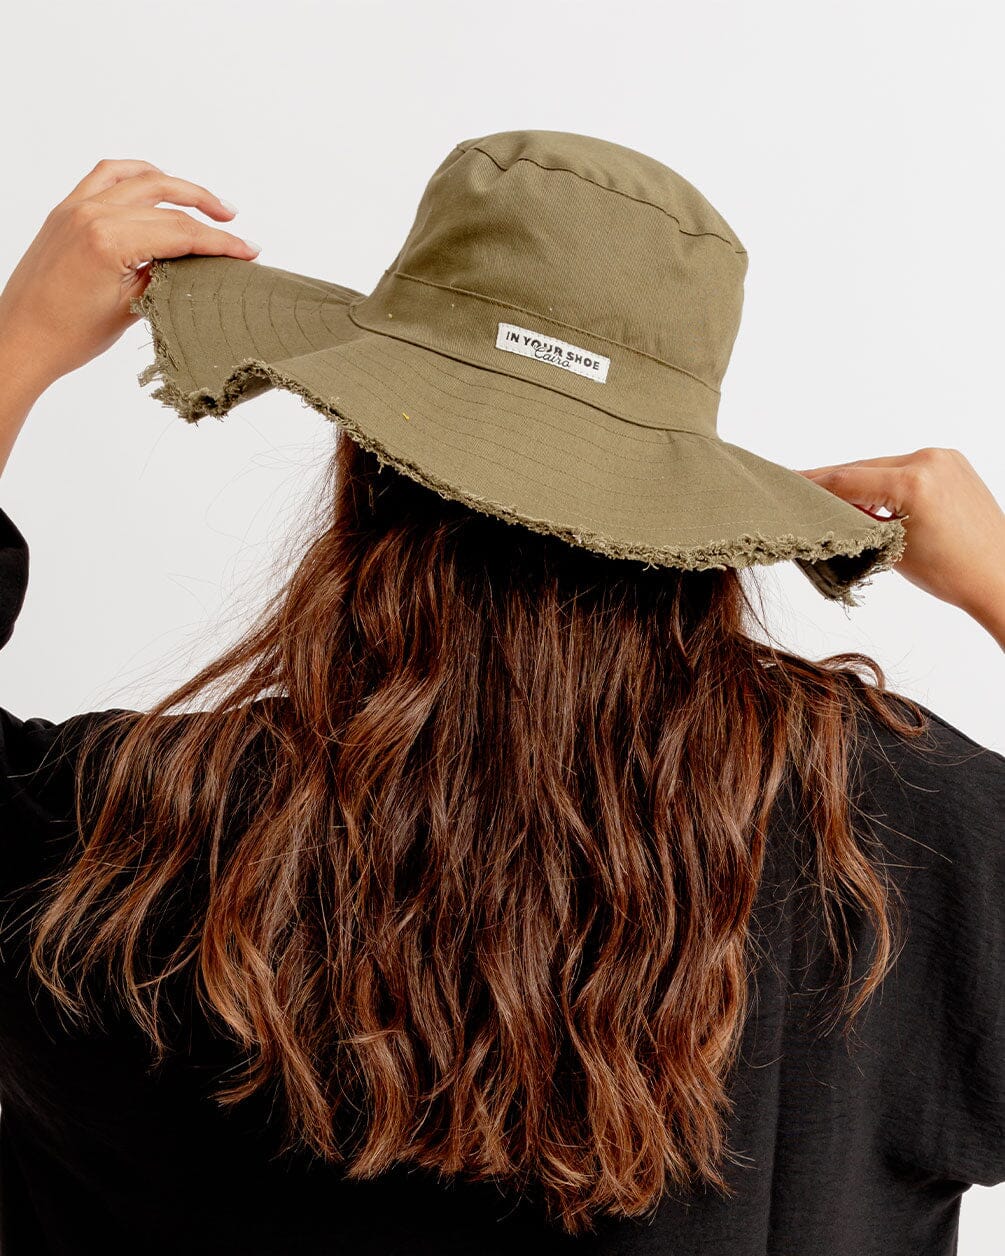 Olive Green Floppy Hat Floppy Hat IN YOUR SHOE 